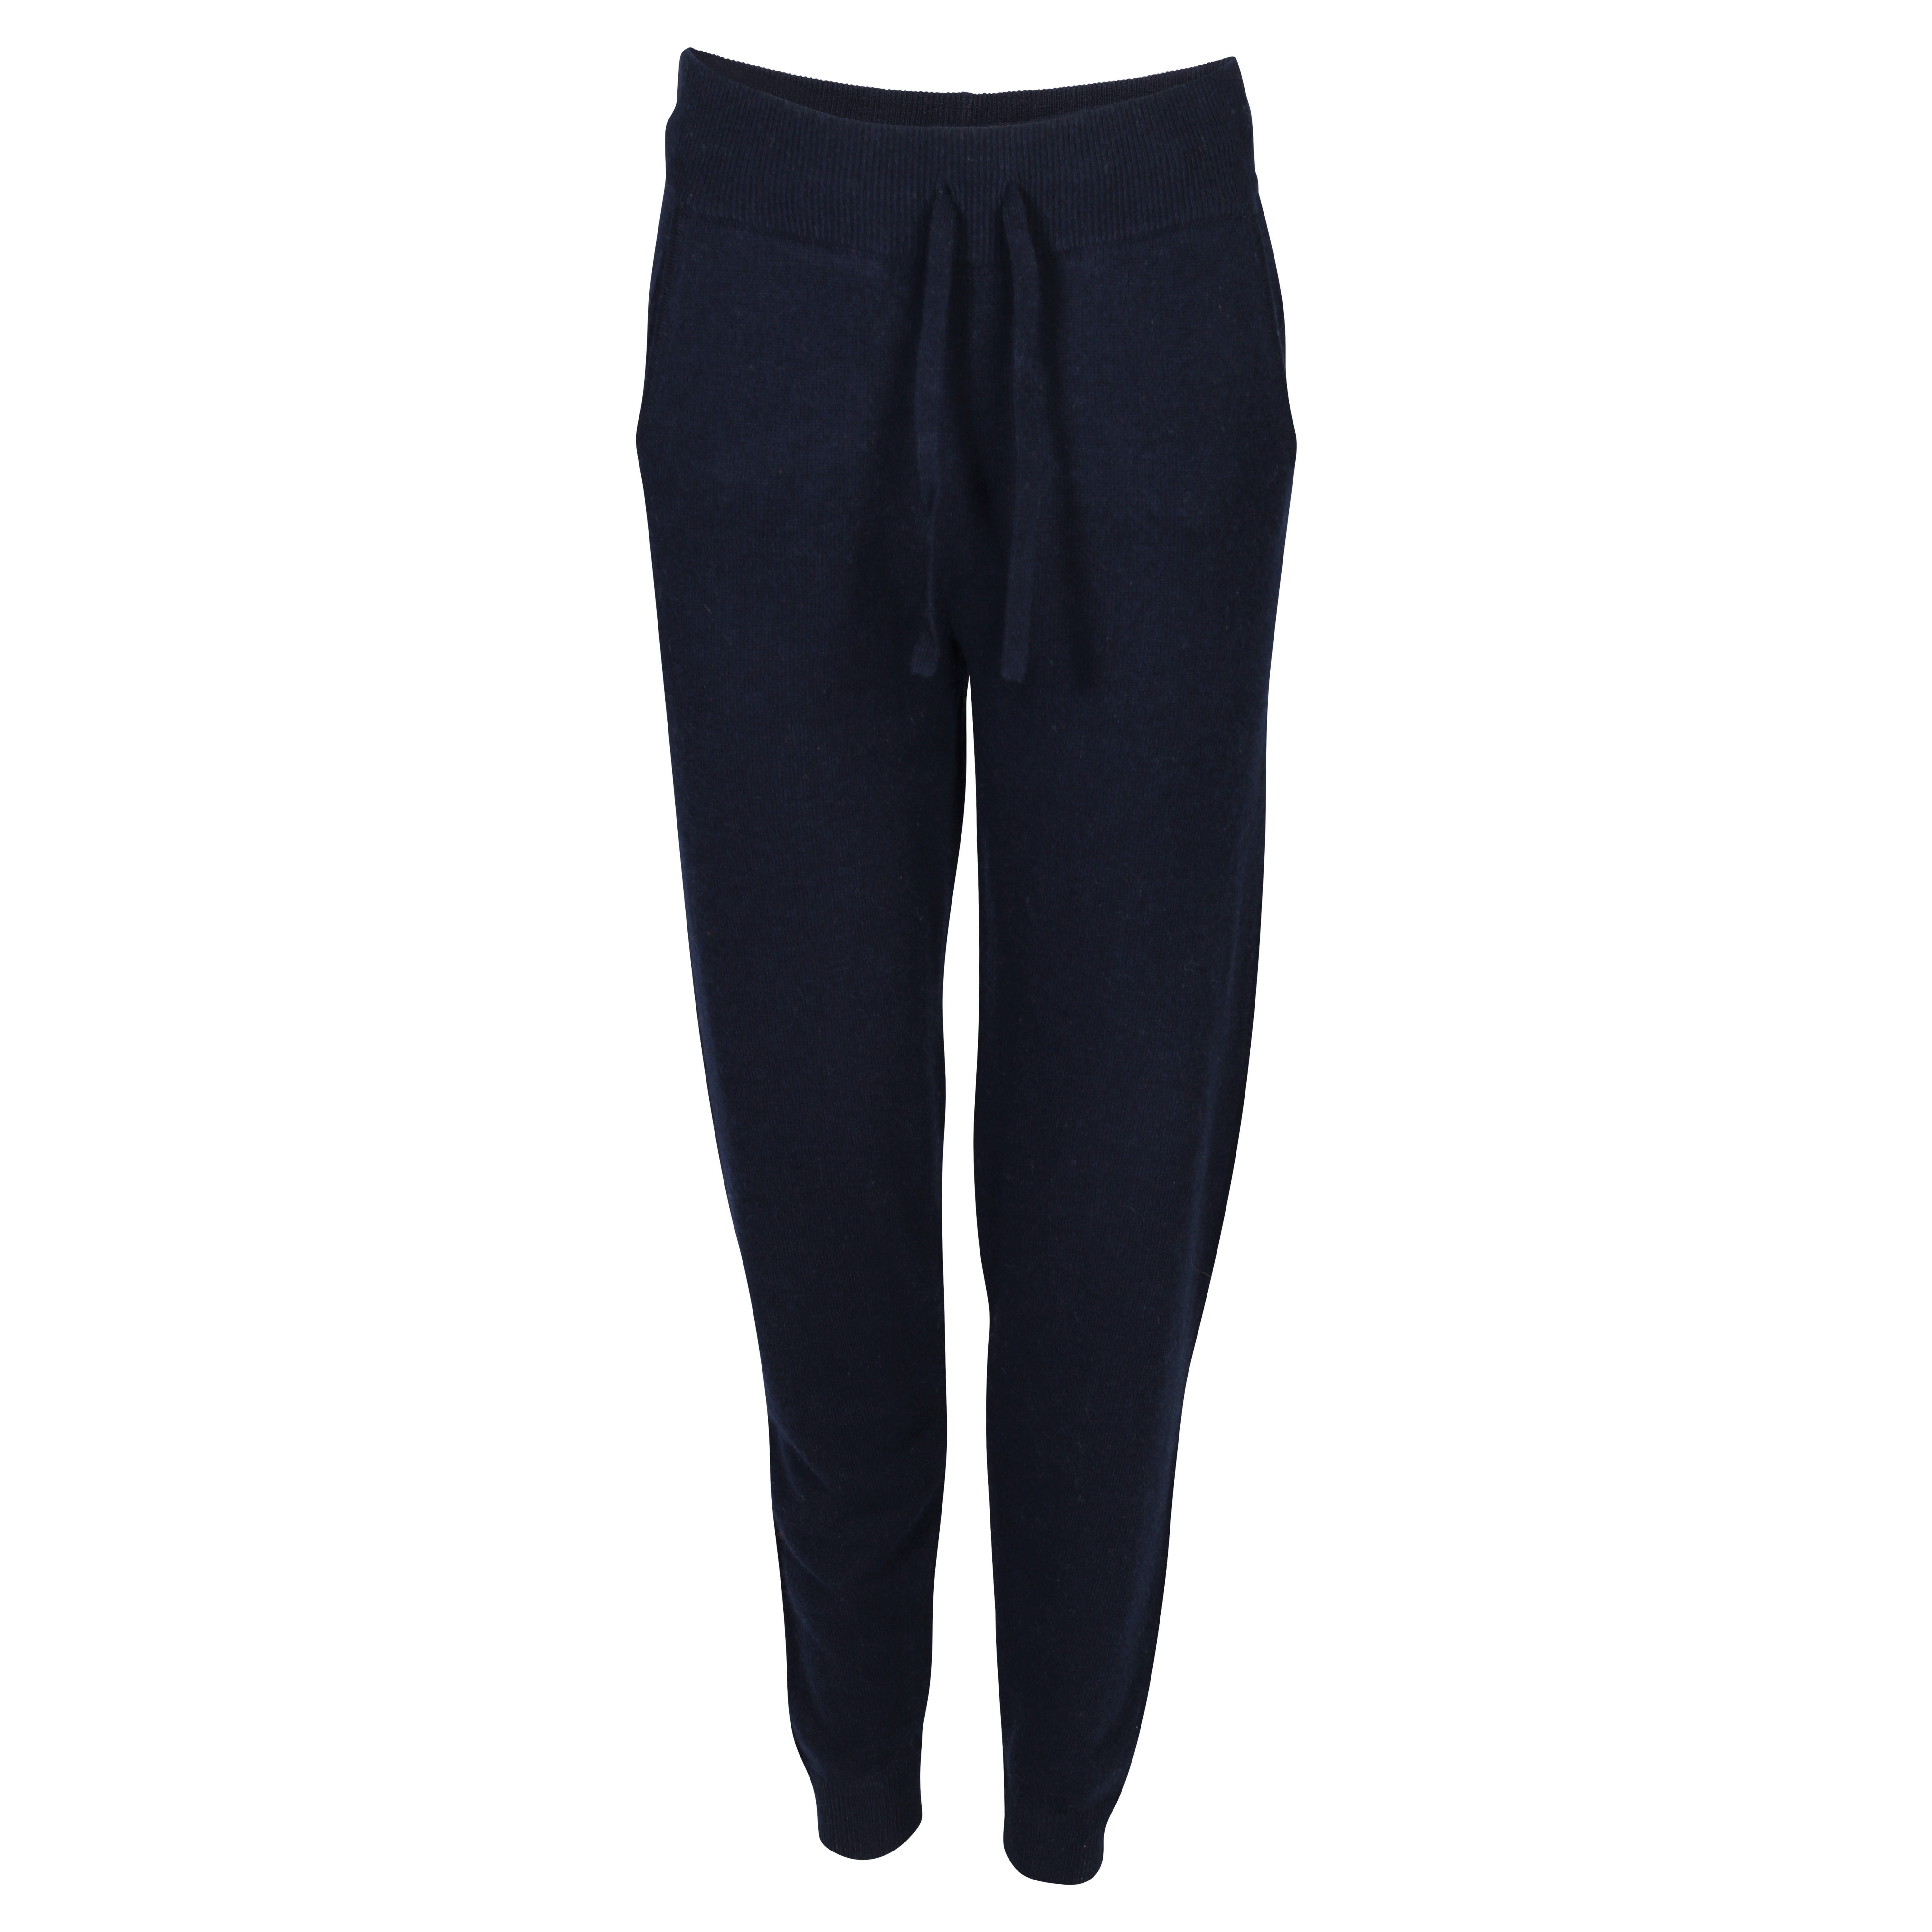 Absolut Cashmere Oliane Jogging Pant in Nuit